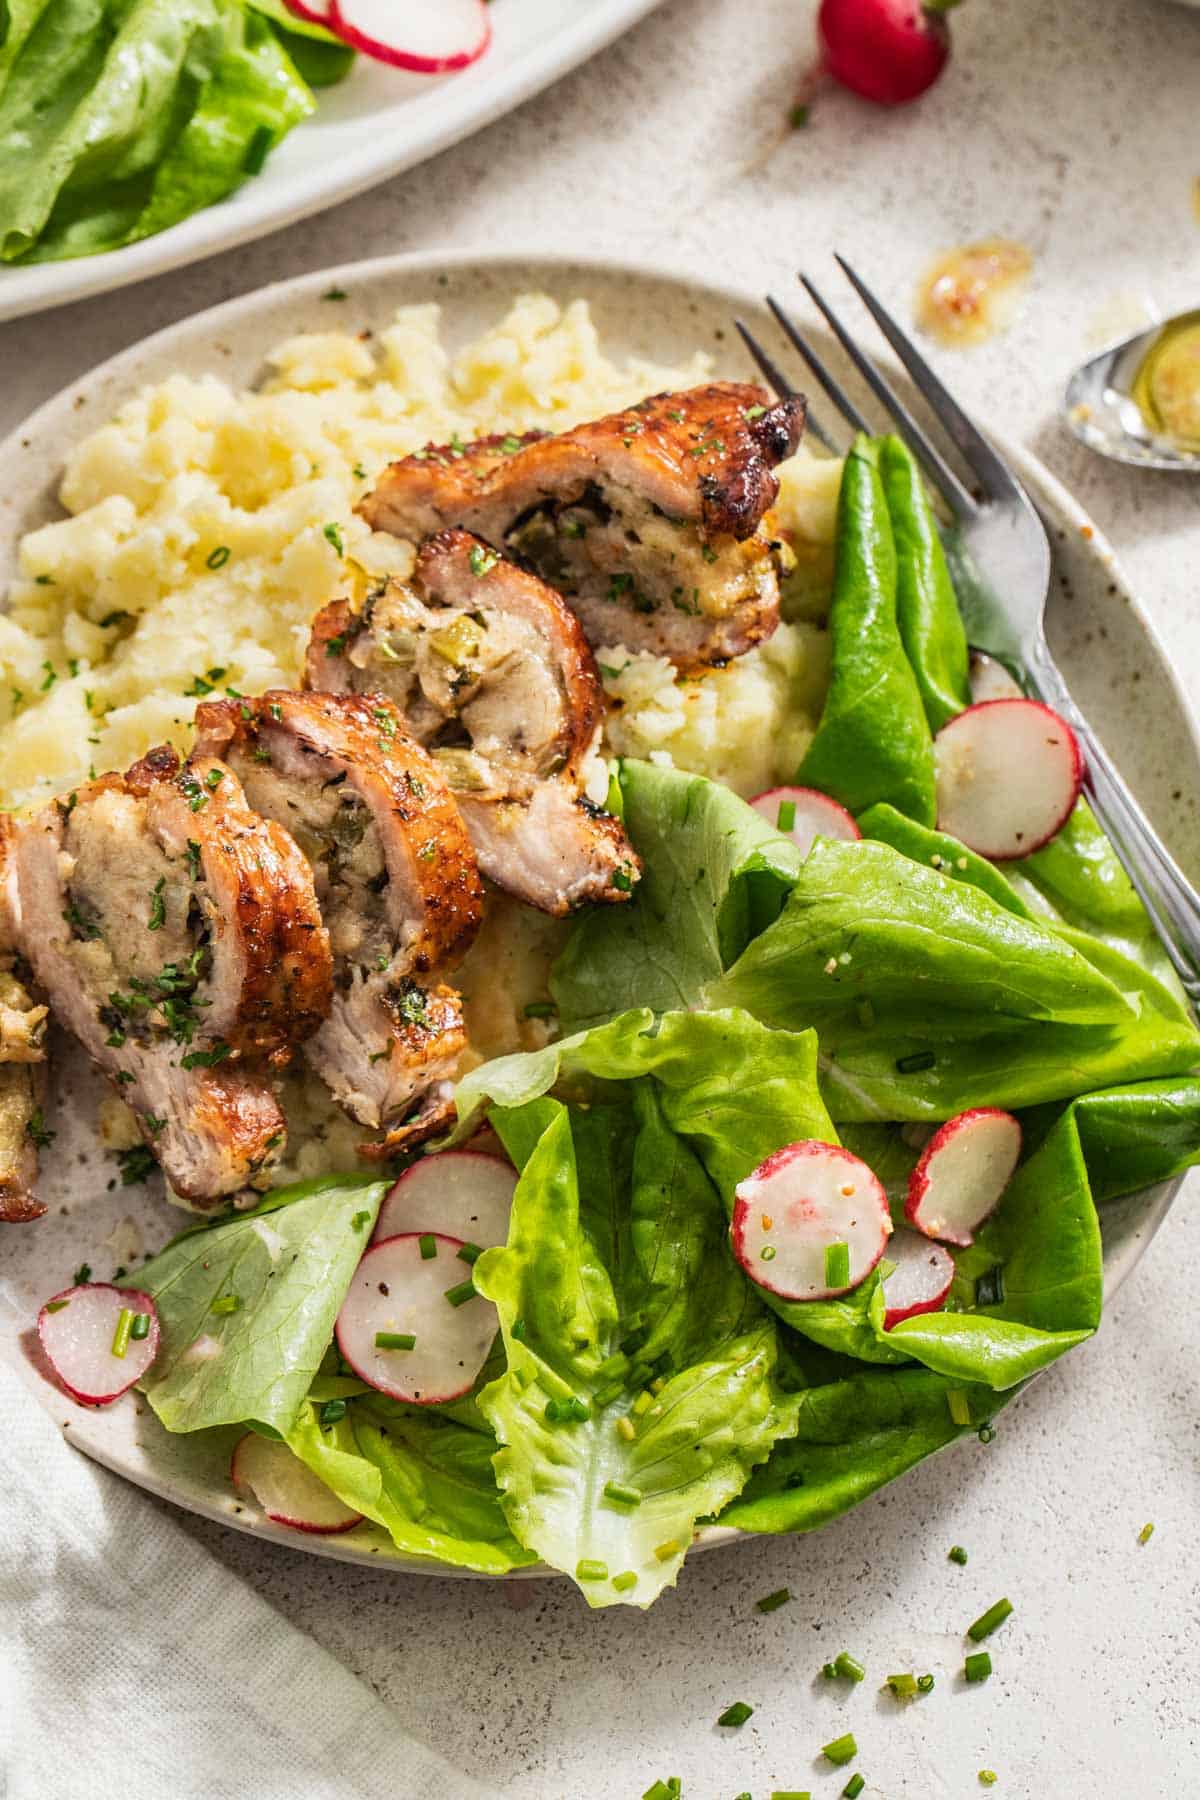 A butter lettuce side salad next to stuffed pork chops and mashed potatoes.